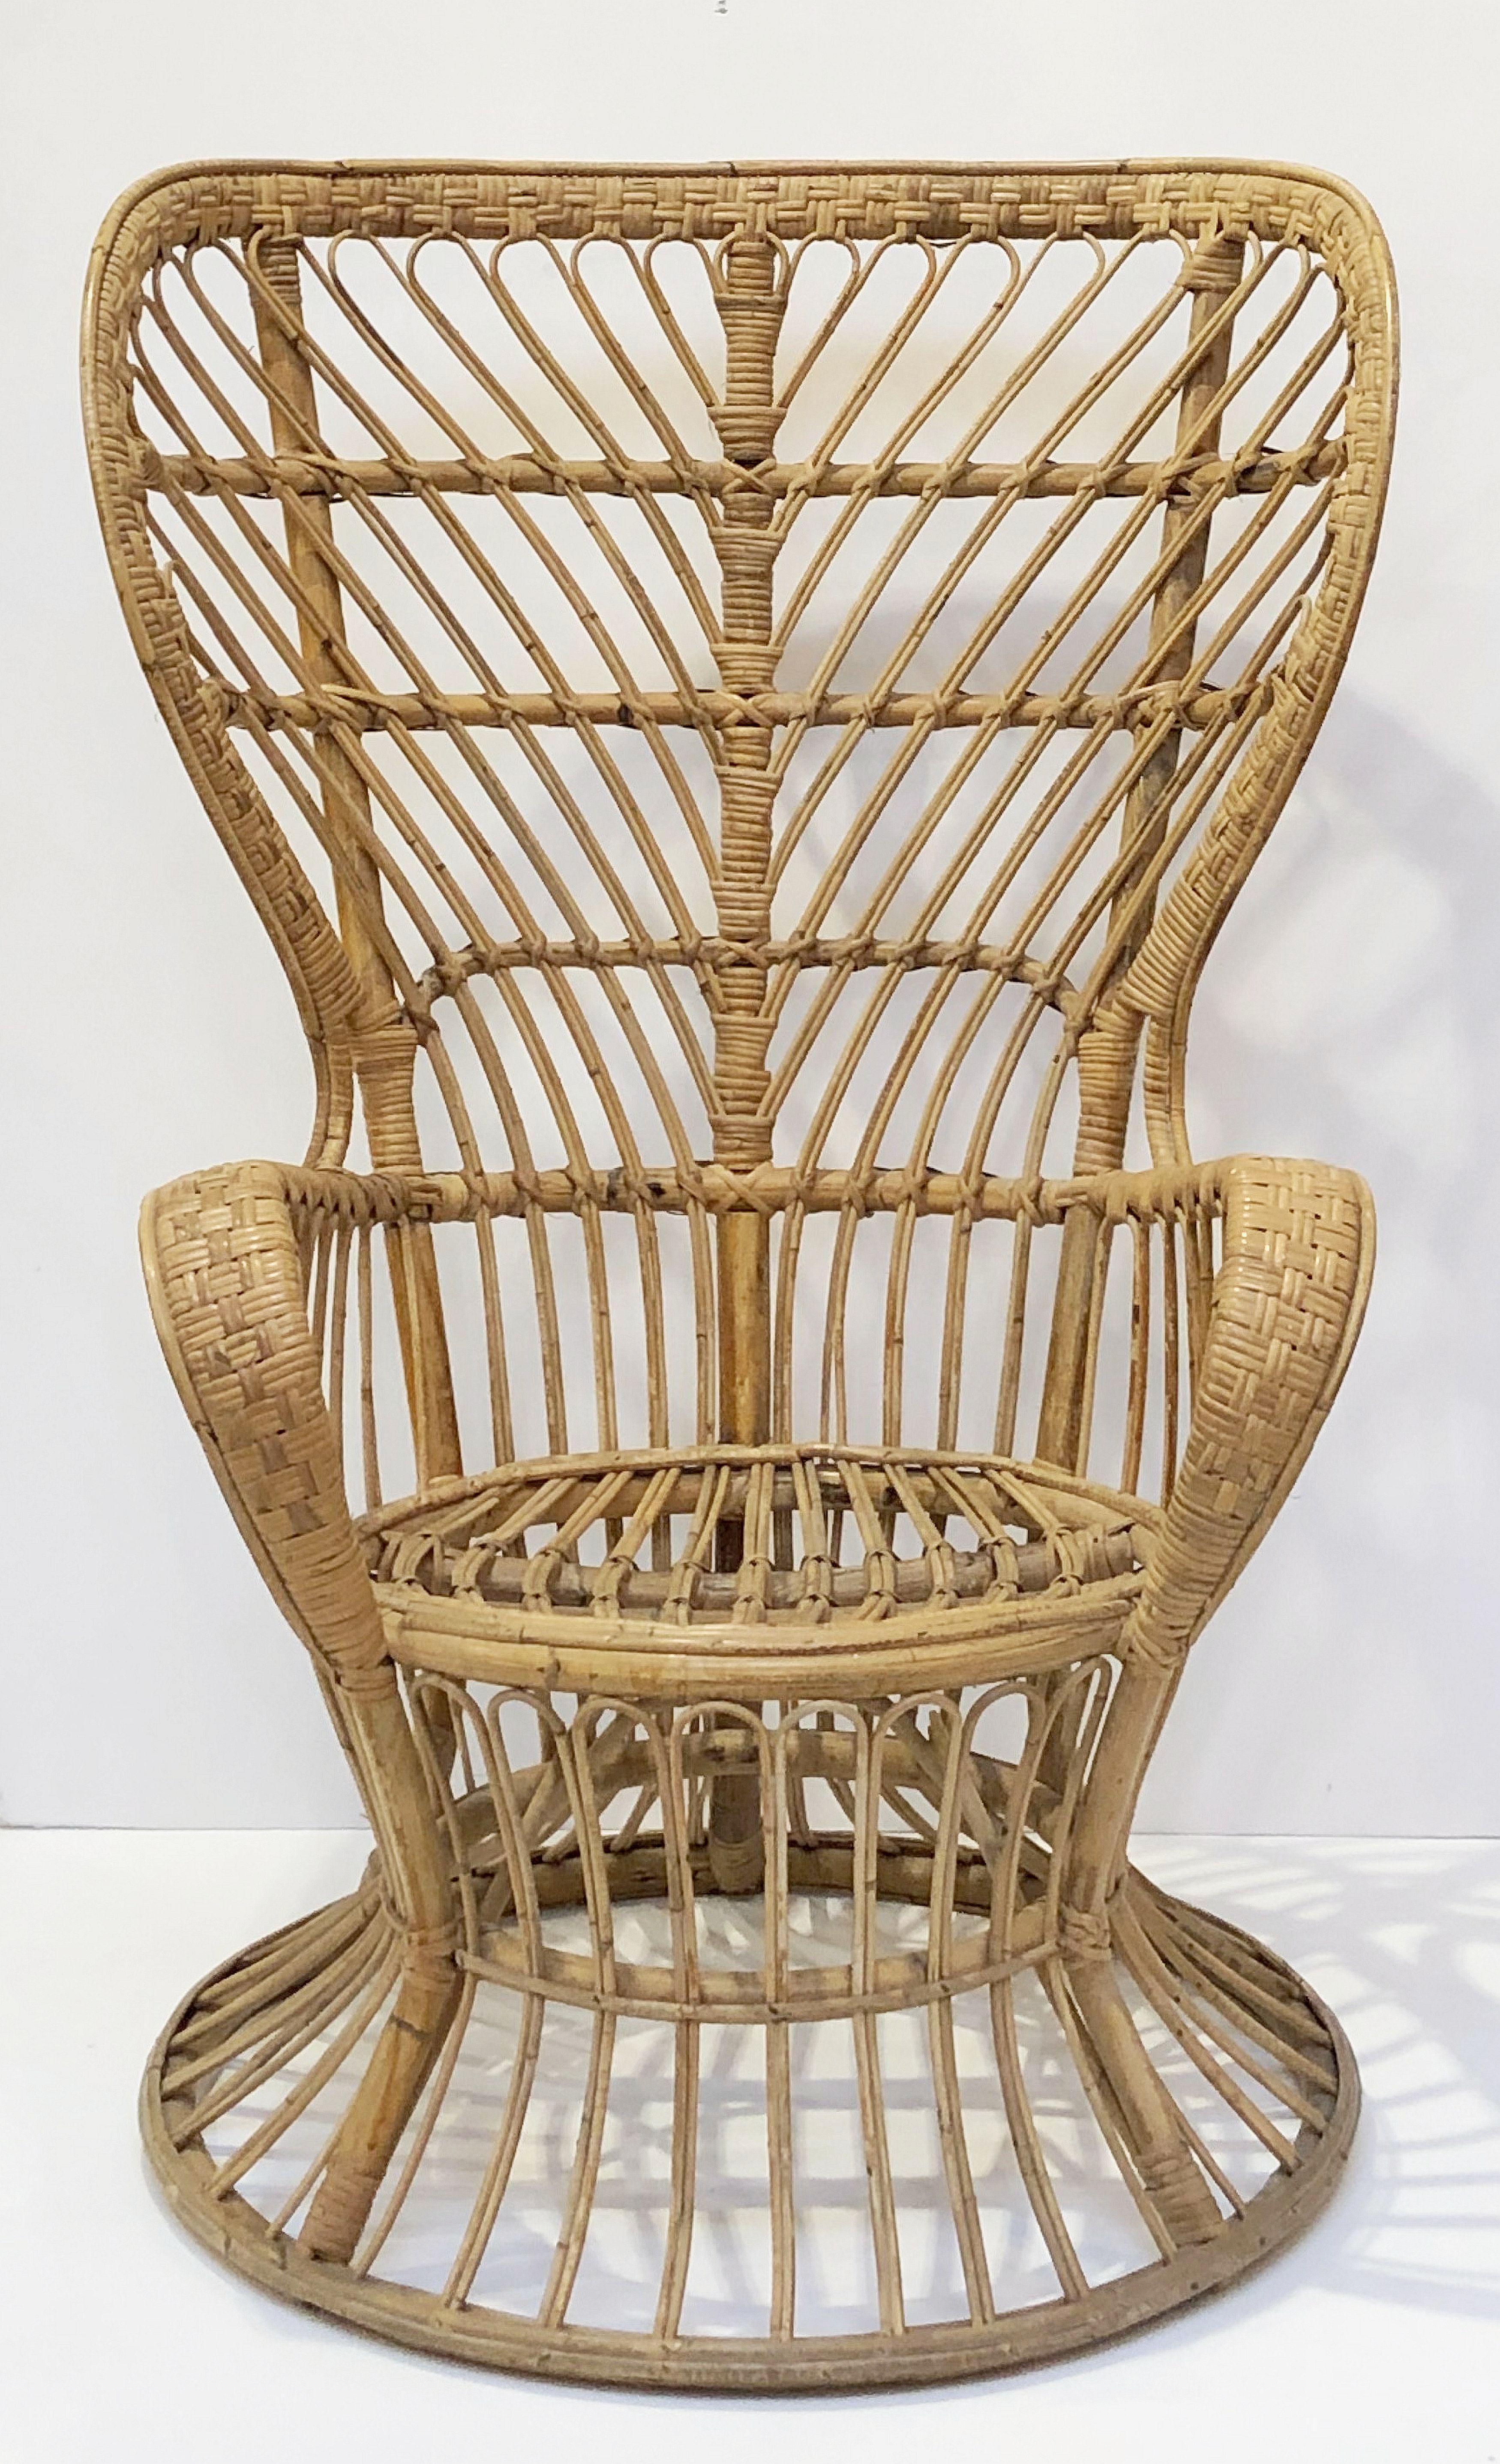 A fine Italian handcrafted mid-century high back bamboo and rattan armchair or lounge chair of the style originally designed for the cruise ship Conte Biancamano by Lio Carminati and Gio Ponti in the 1950s and manufactured by Pierantonio Bonacina.